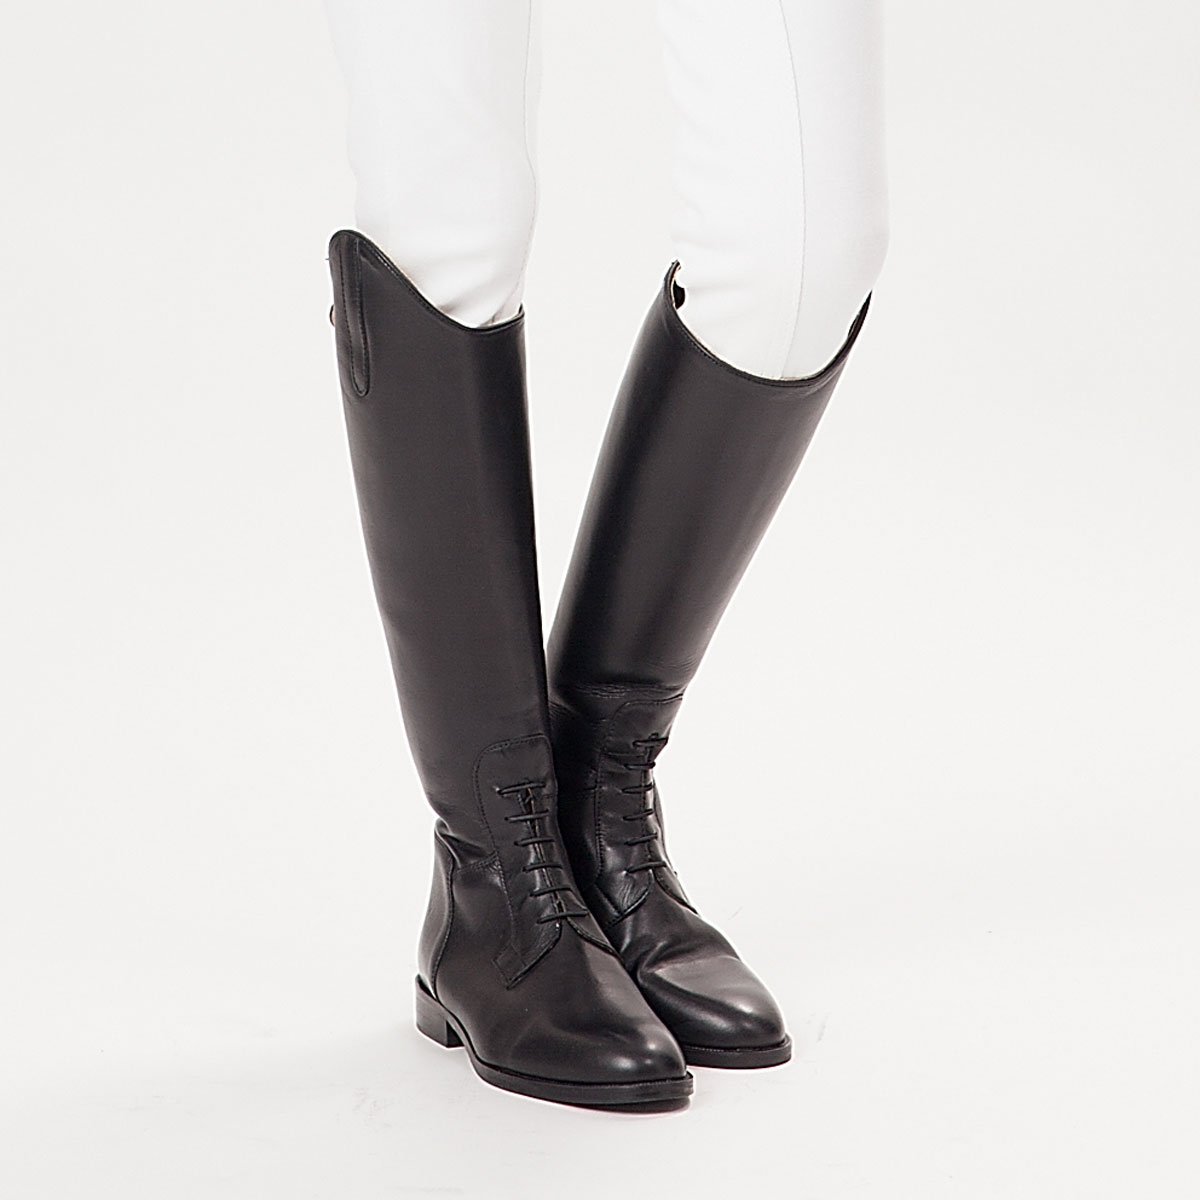 Shires Norfolk Long Leather Riding Boots Black Plain Leather 